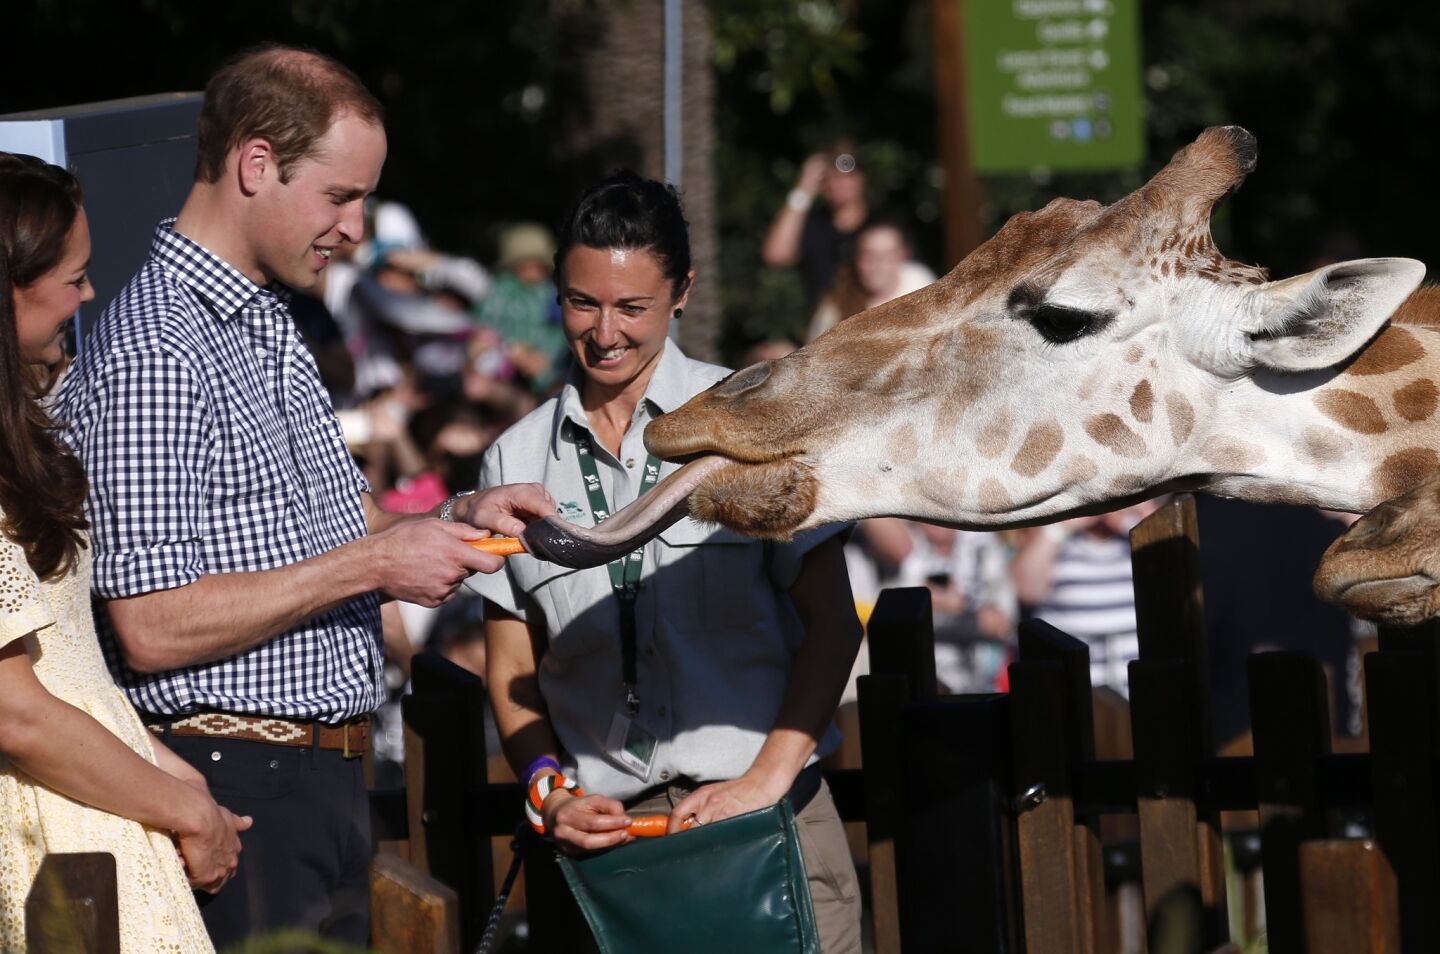 Britain's Prince William reacts as he and Kate feed giraffes during a visit to Sydney's Taronga Zoo.